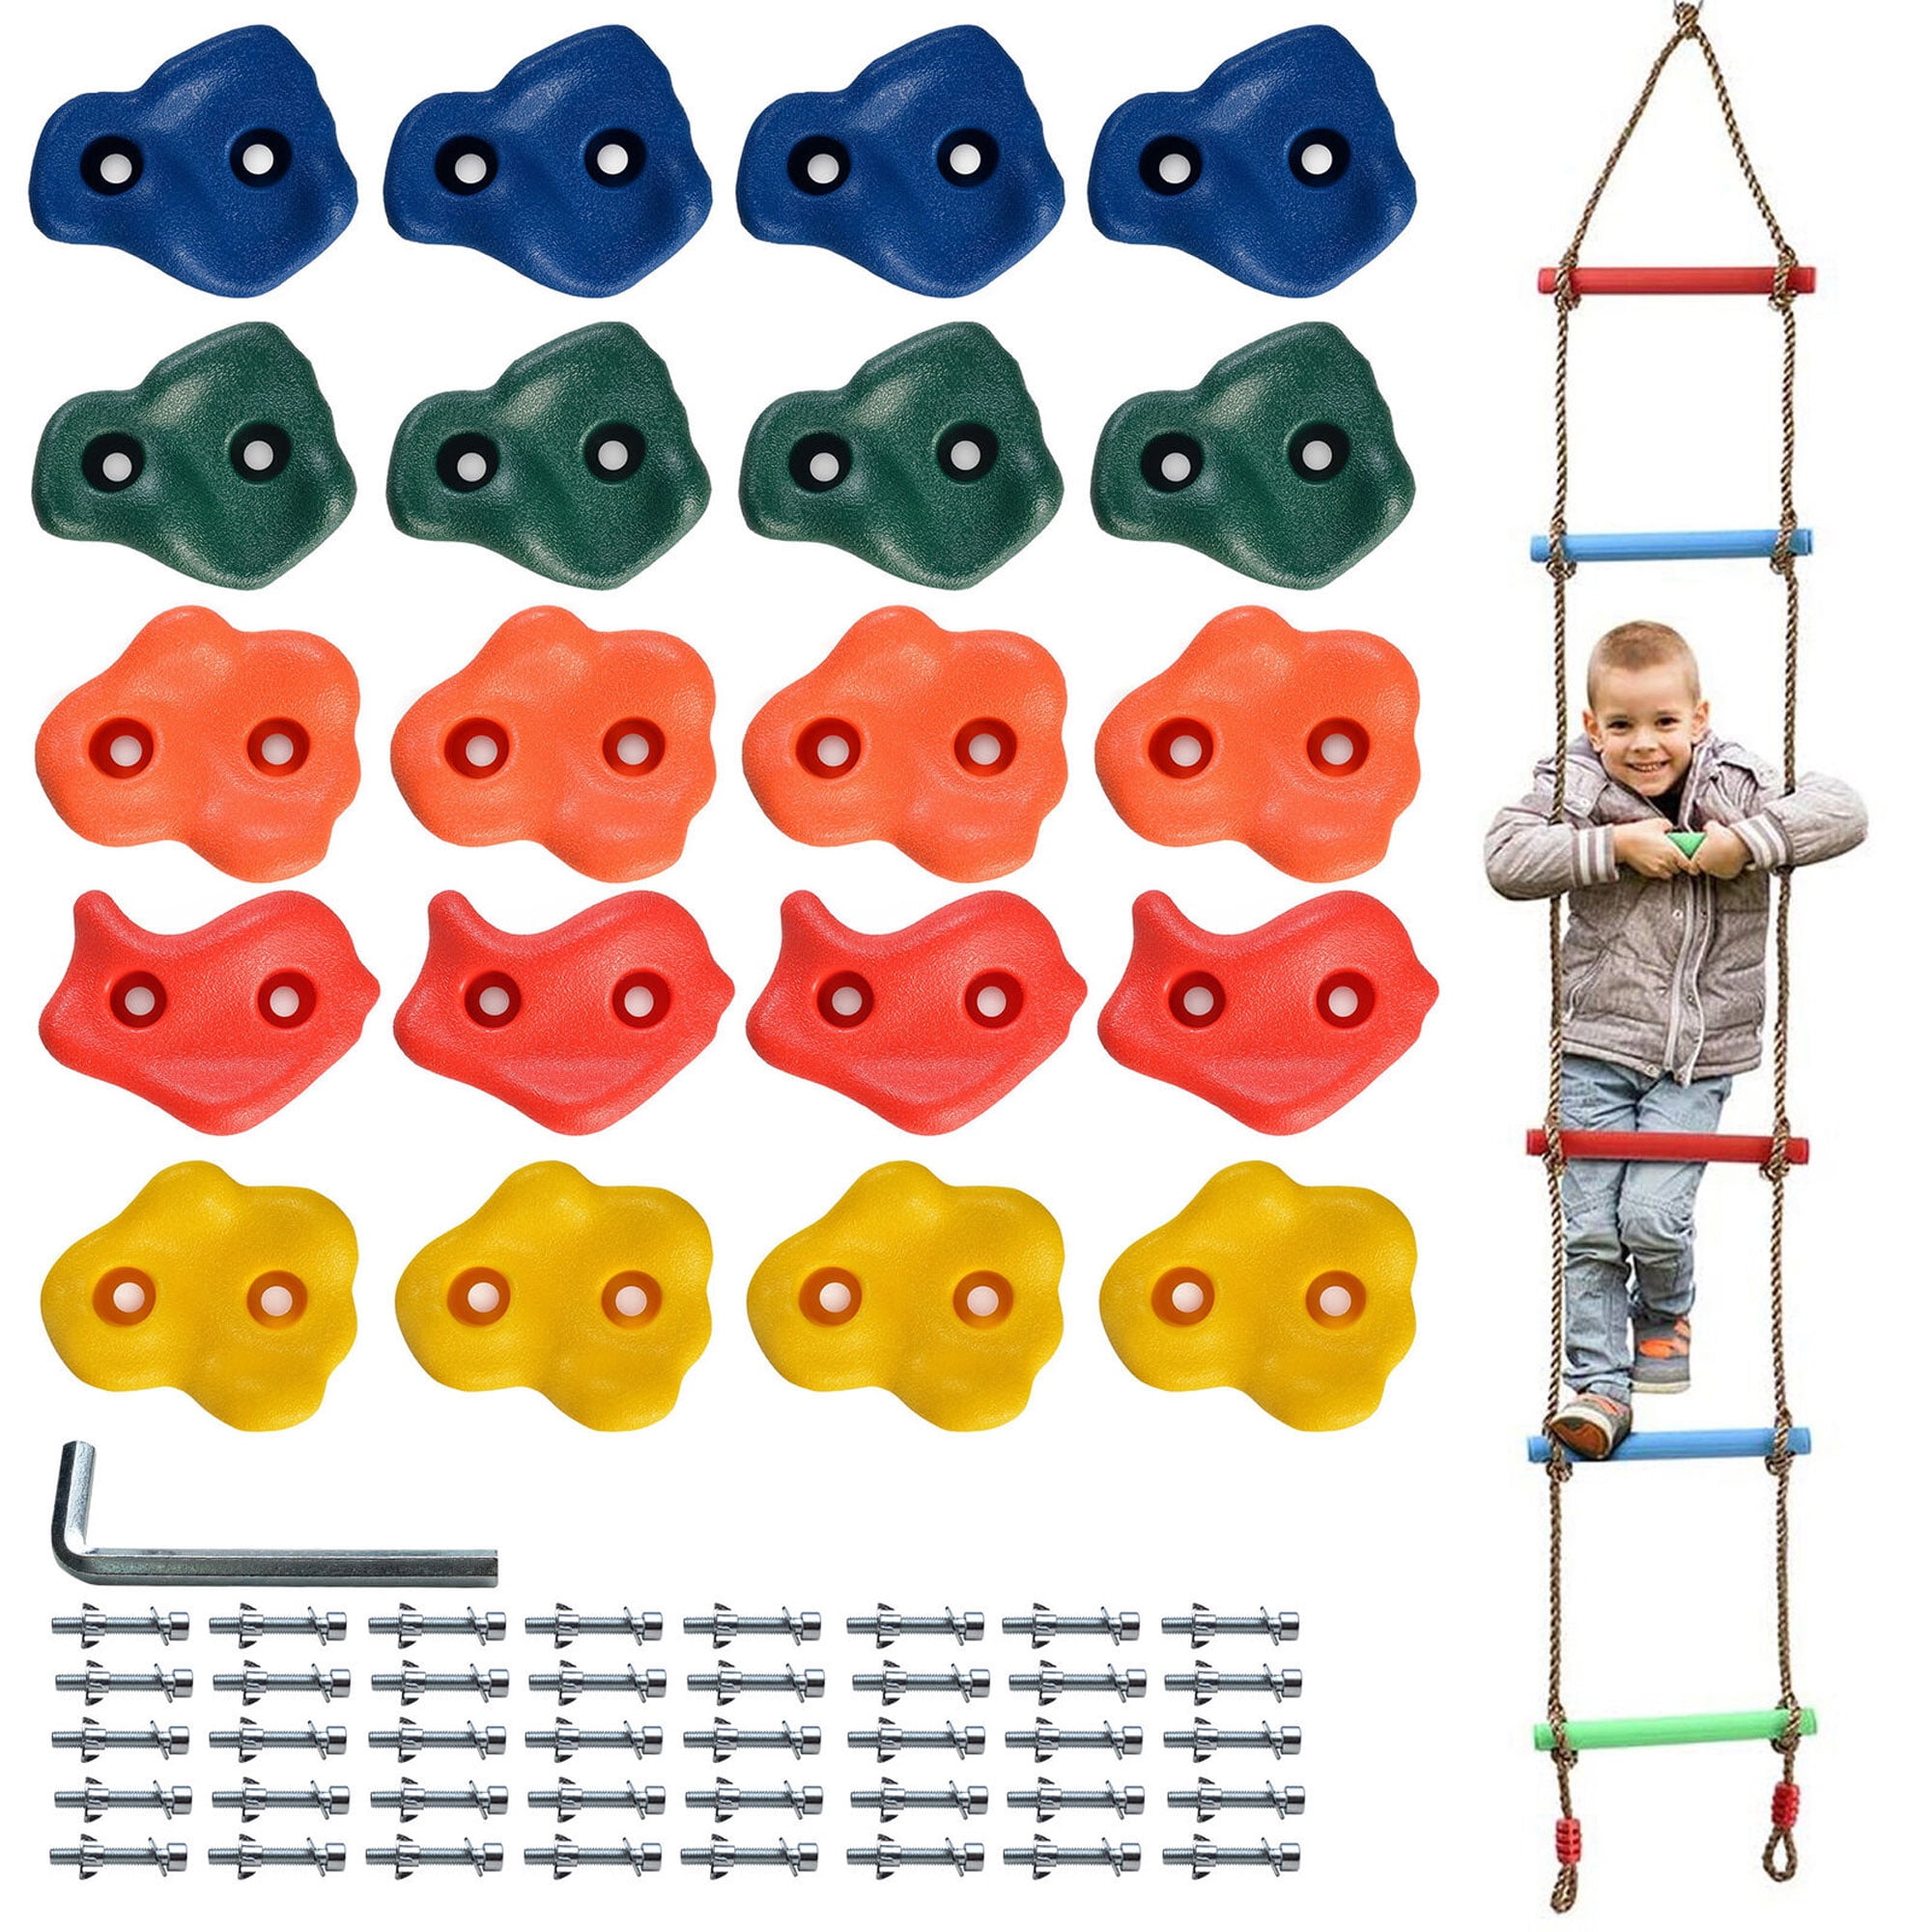 20X Climbing Holds Set Rock Wall Stones with Kids Hanging Rope Ladder Play Fun